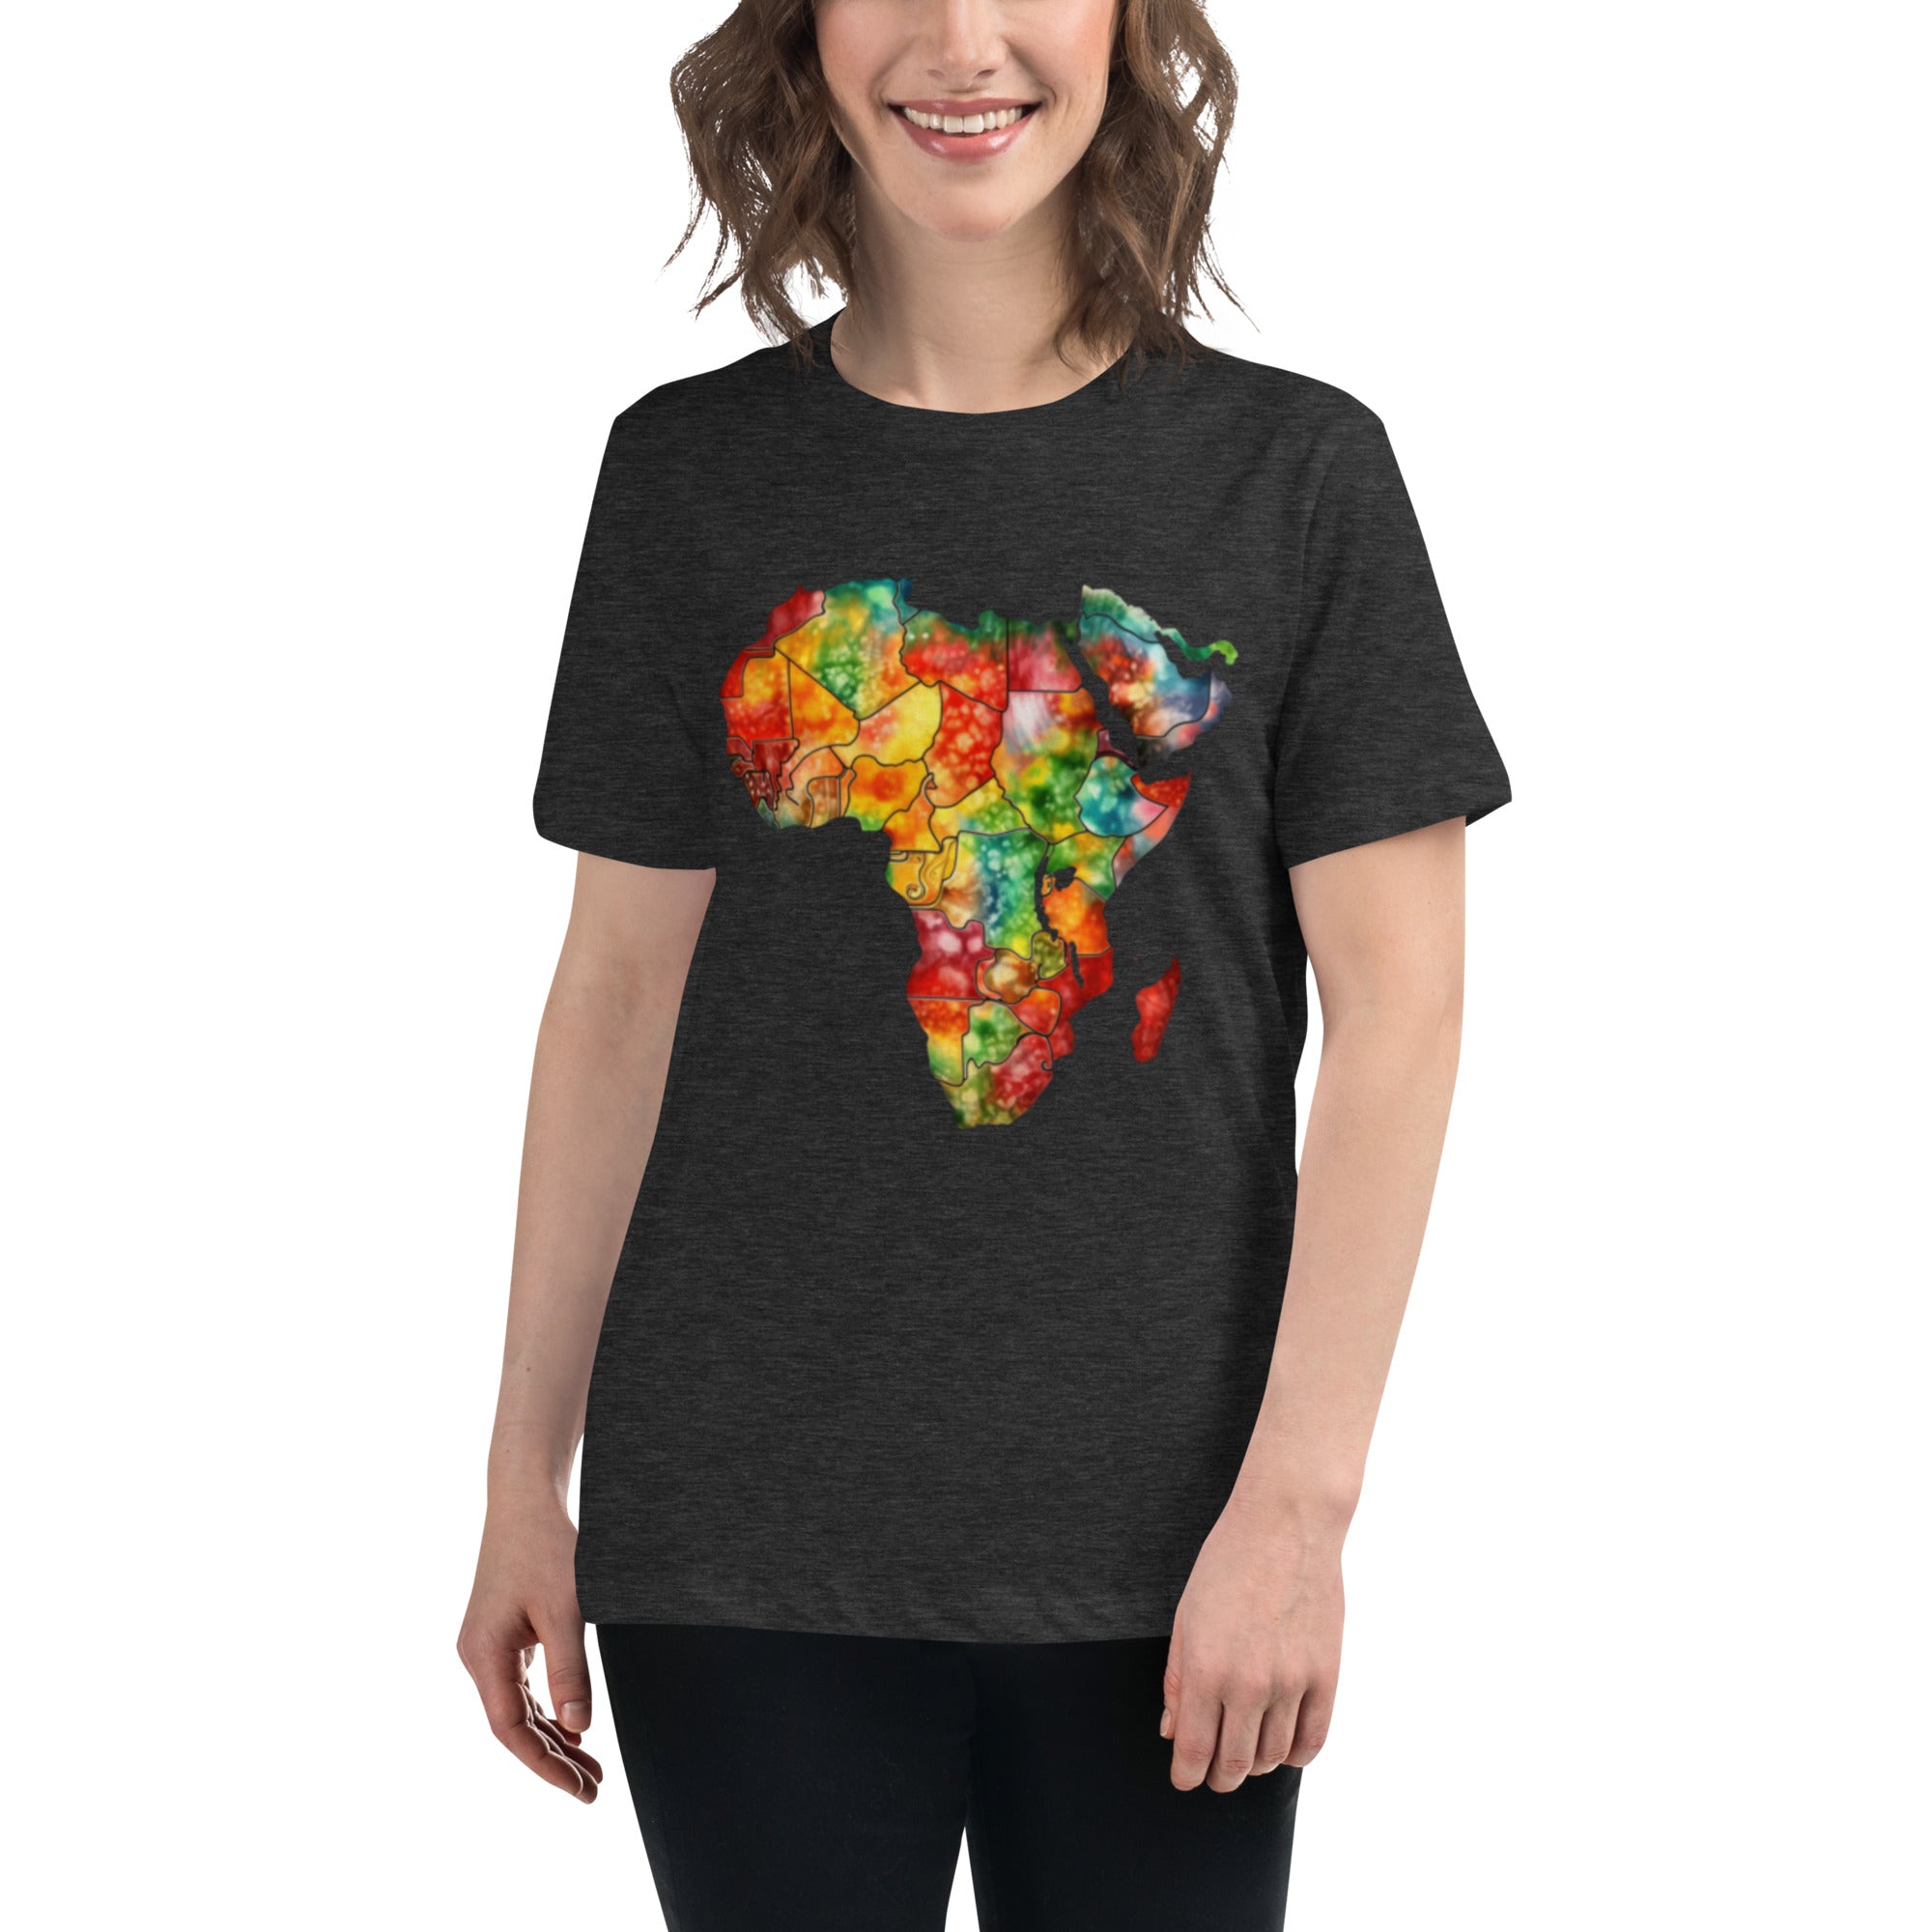 Women's Relaxed T-Shirt, Africa Map, Gift, Back to School.